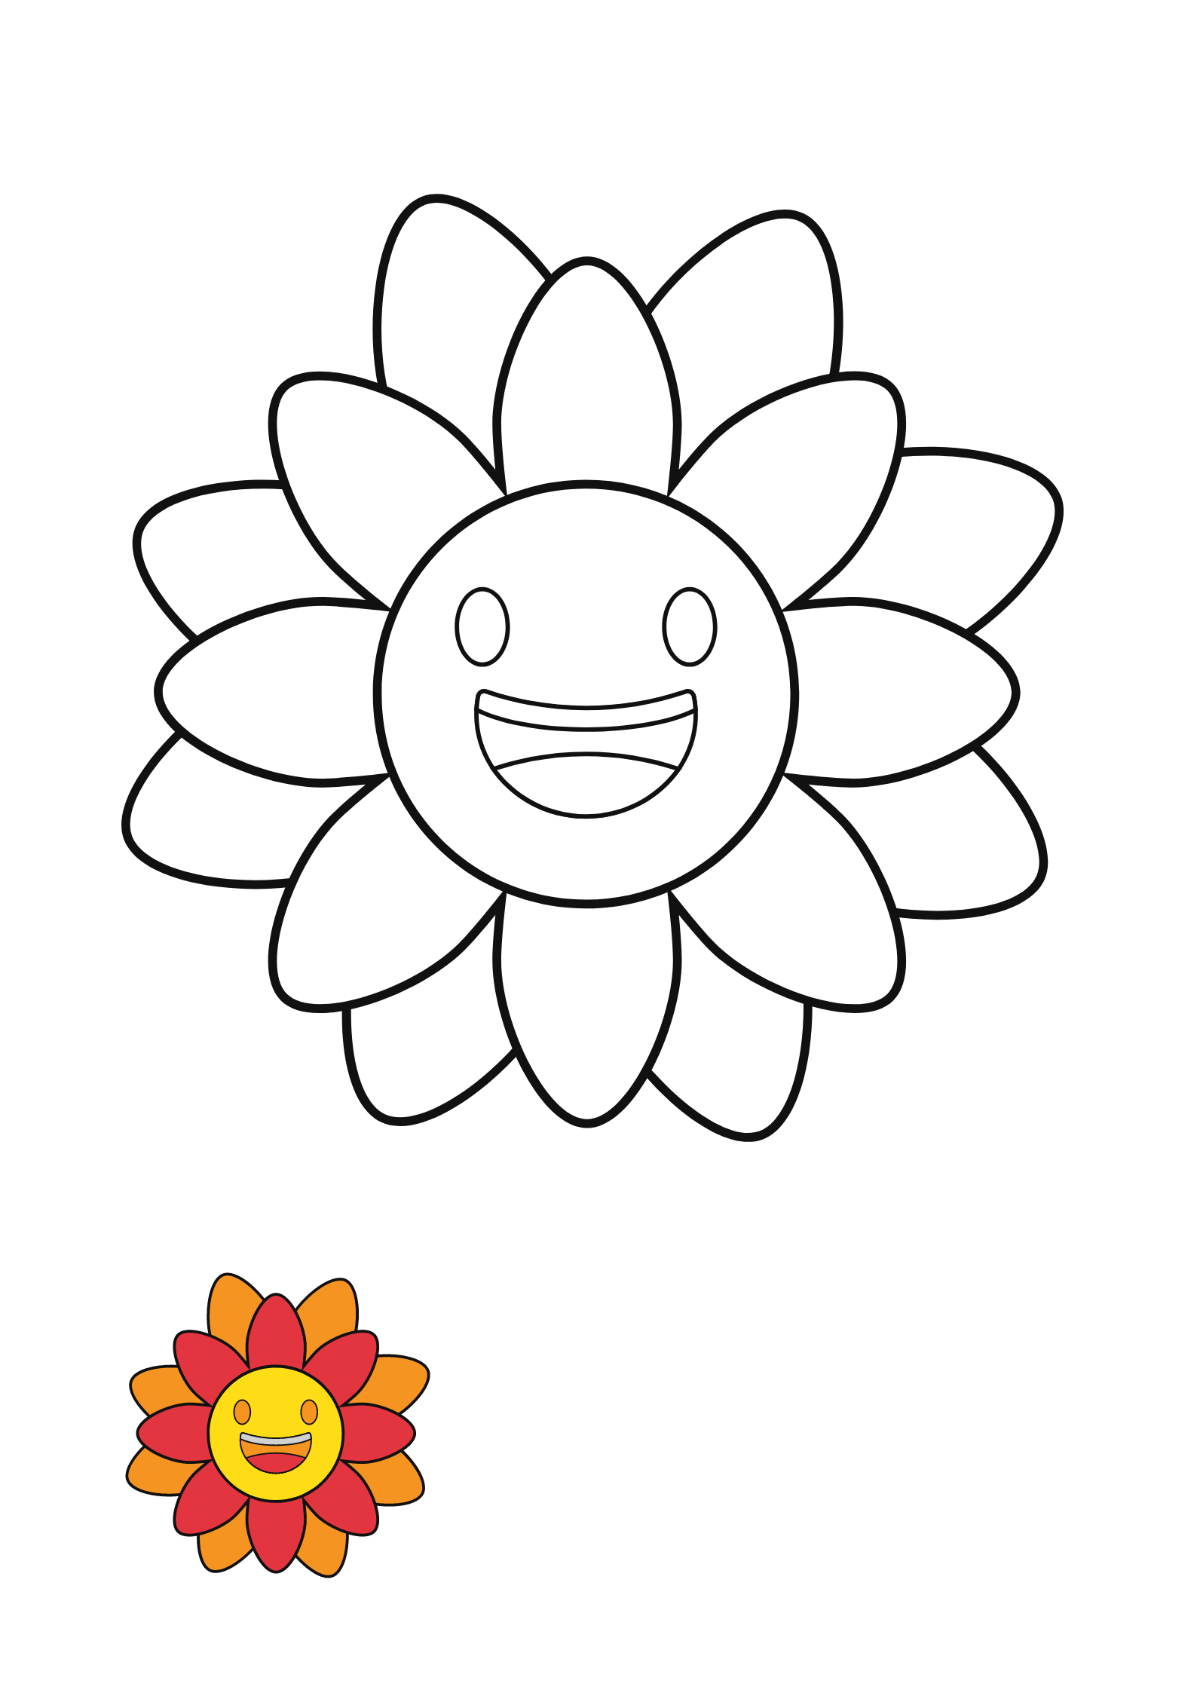 Free Flower Smiley coloring page Template